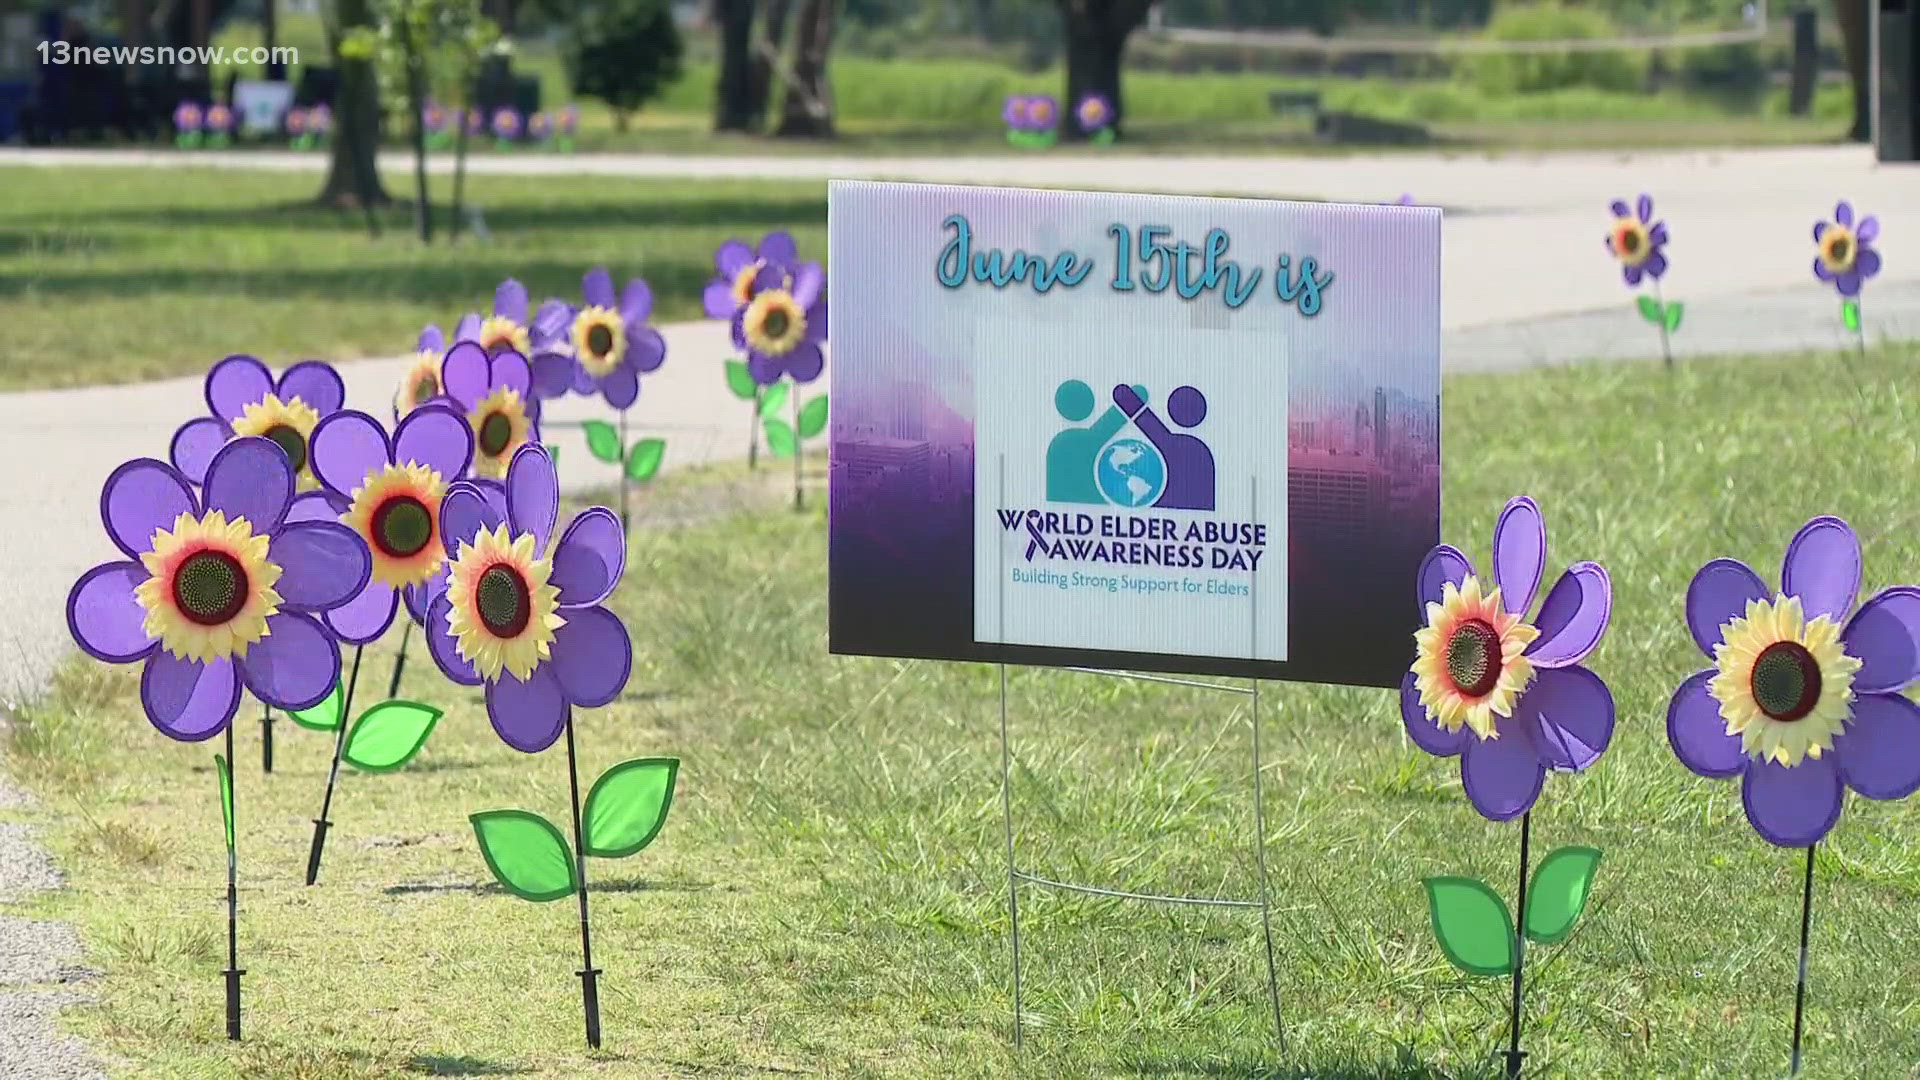 Saturday is World Elder Abuse Awareness Day. In Virginia Beach, leaders hope to put an end to this type of violence.